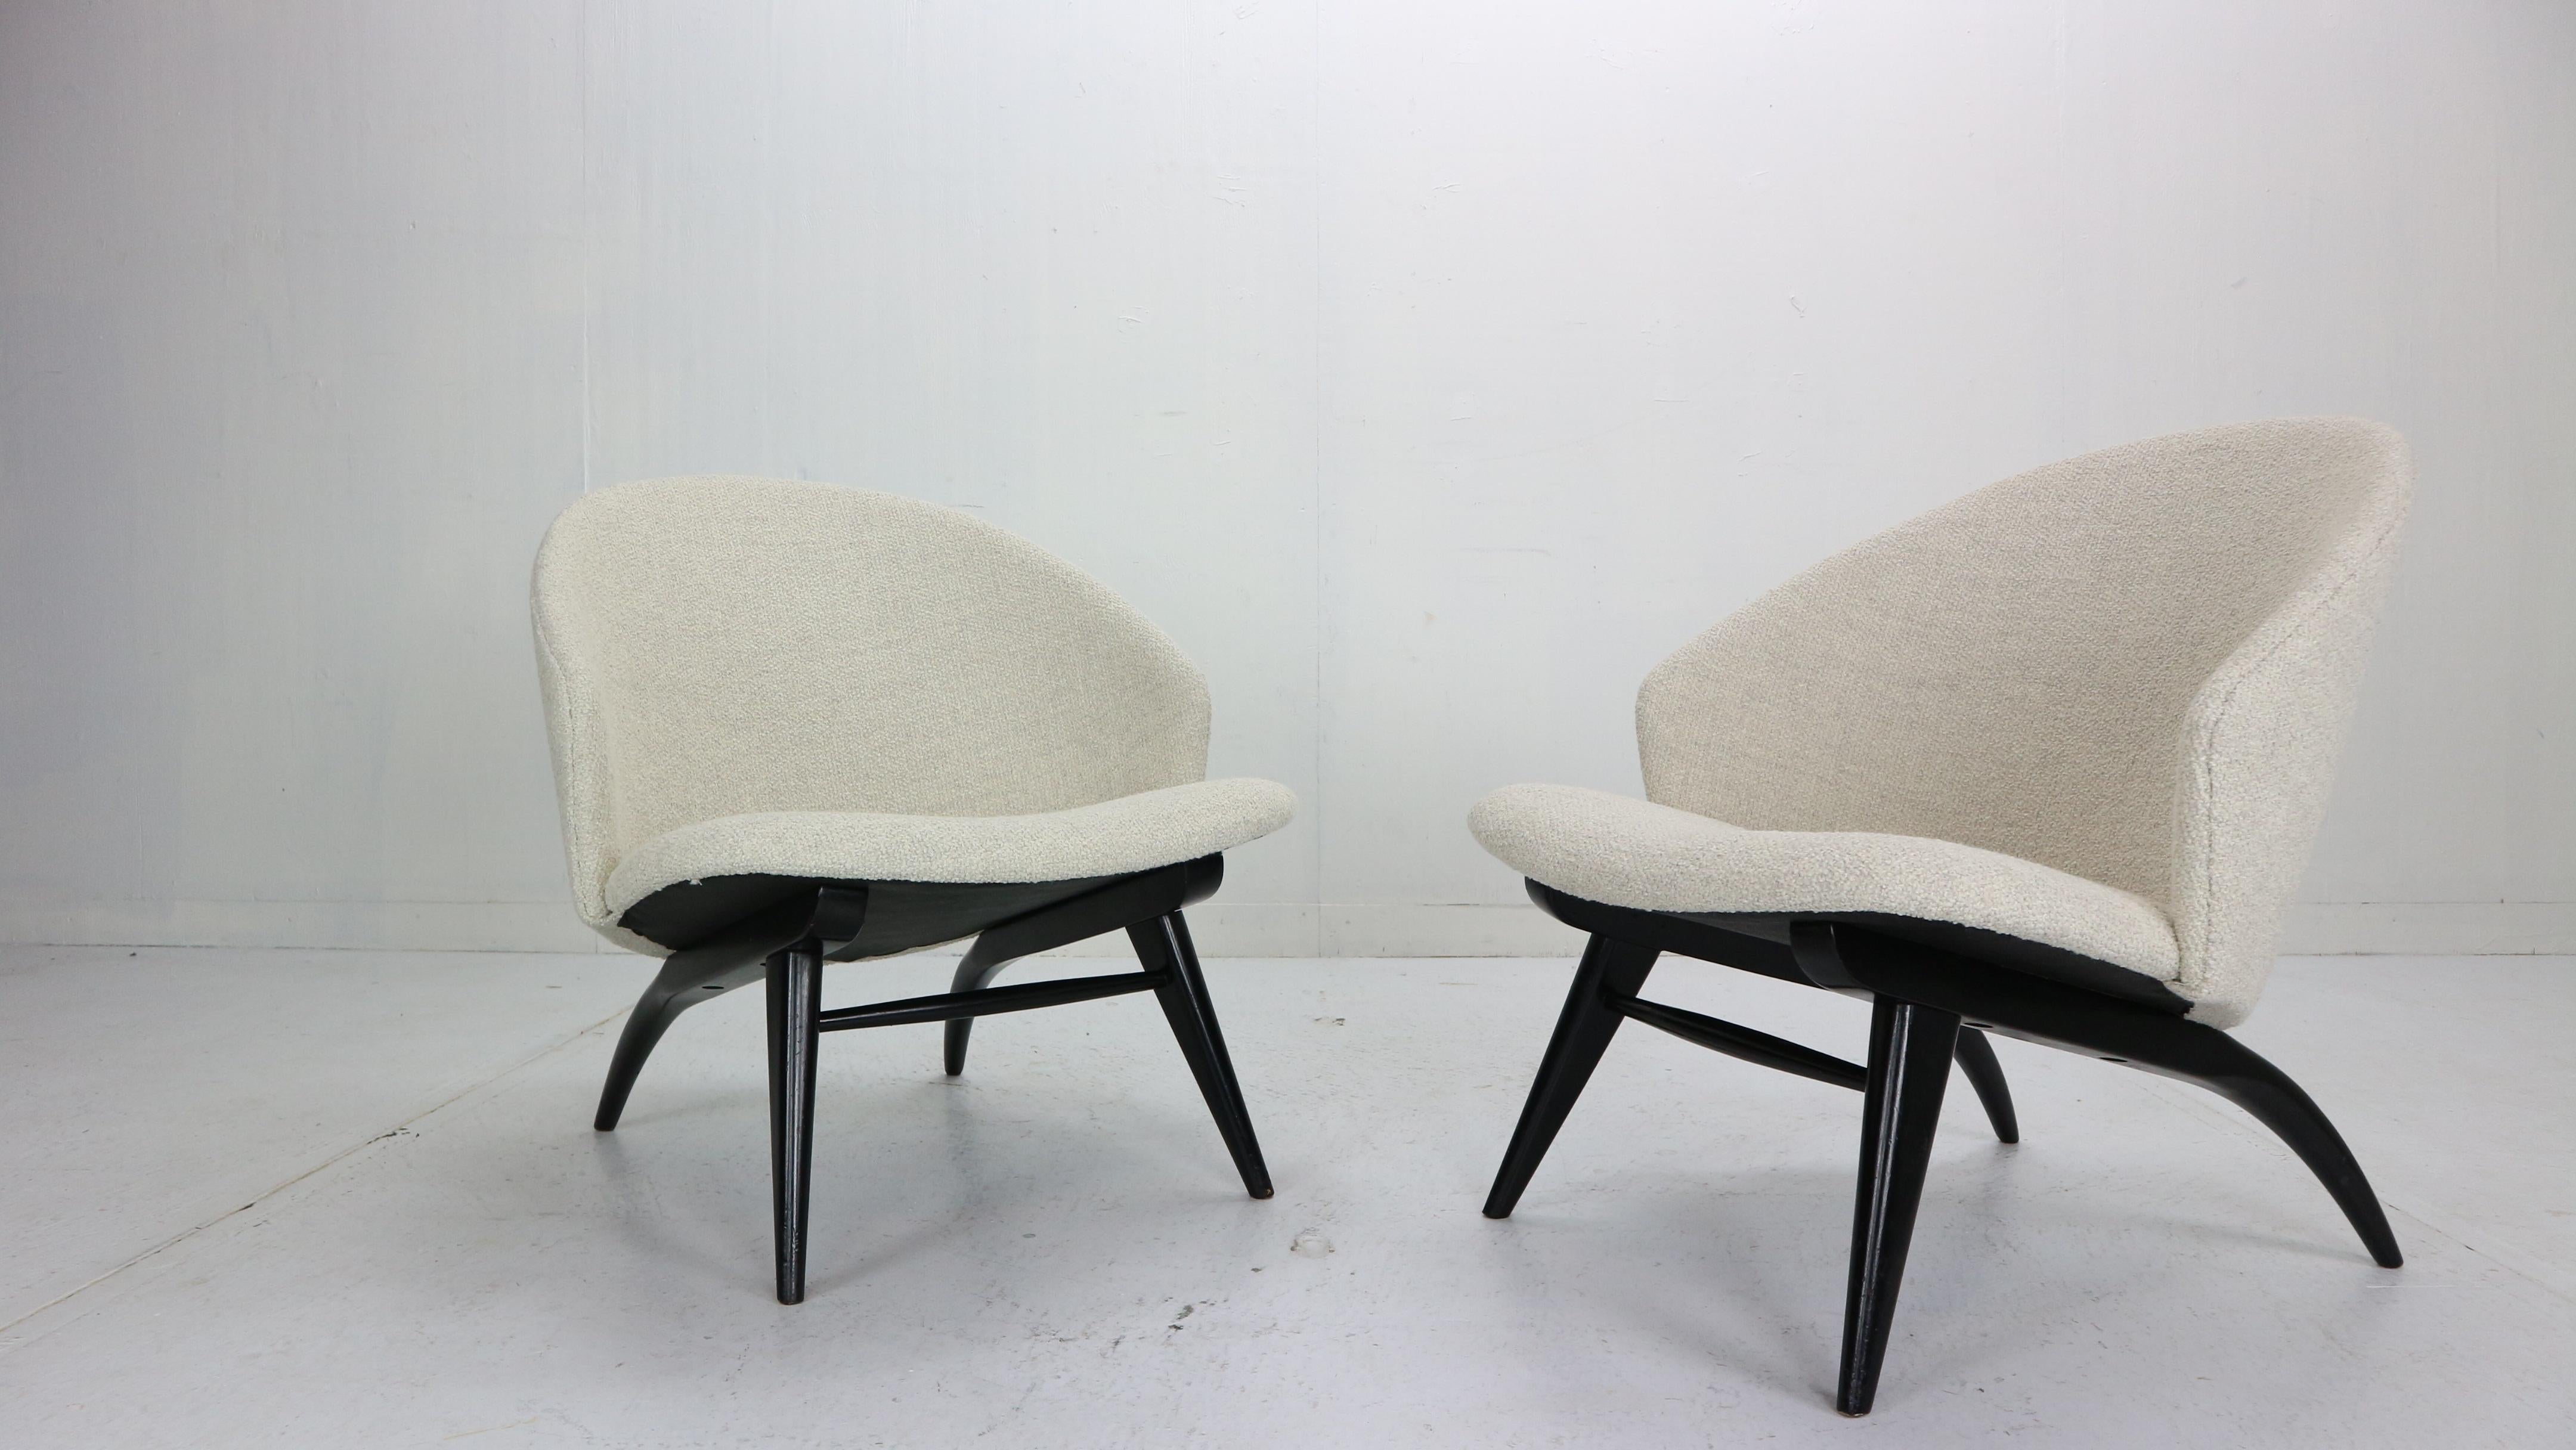 Set of two lounge chairs designed by Theo Ruth and manufactured by famous Dutch furniture fabric Artifort in 1950s period.

The chairs has been newly upholstered with light bouclé fabric, black painted wooden feet makes a nice contrast between